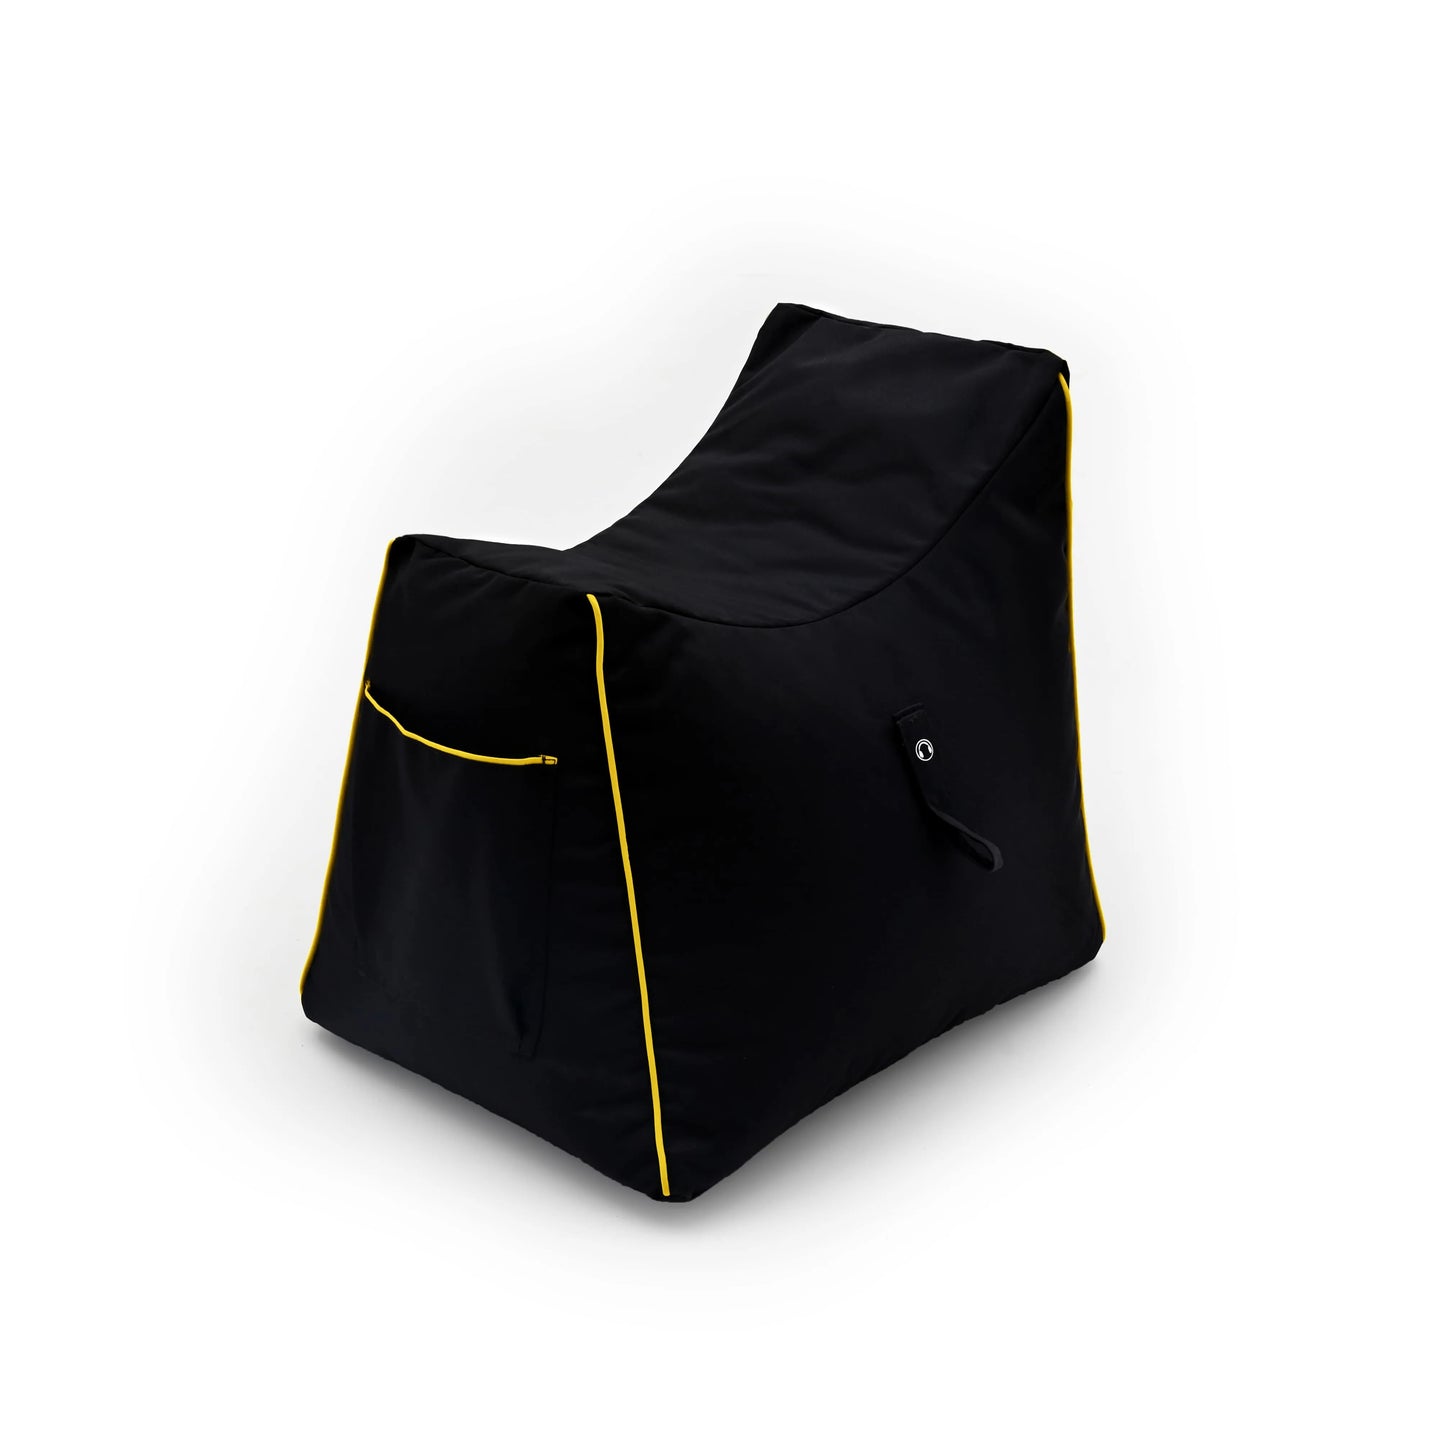 A black and yellow beanbag cover, perfect for relaxing or gaming.